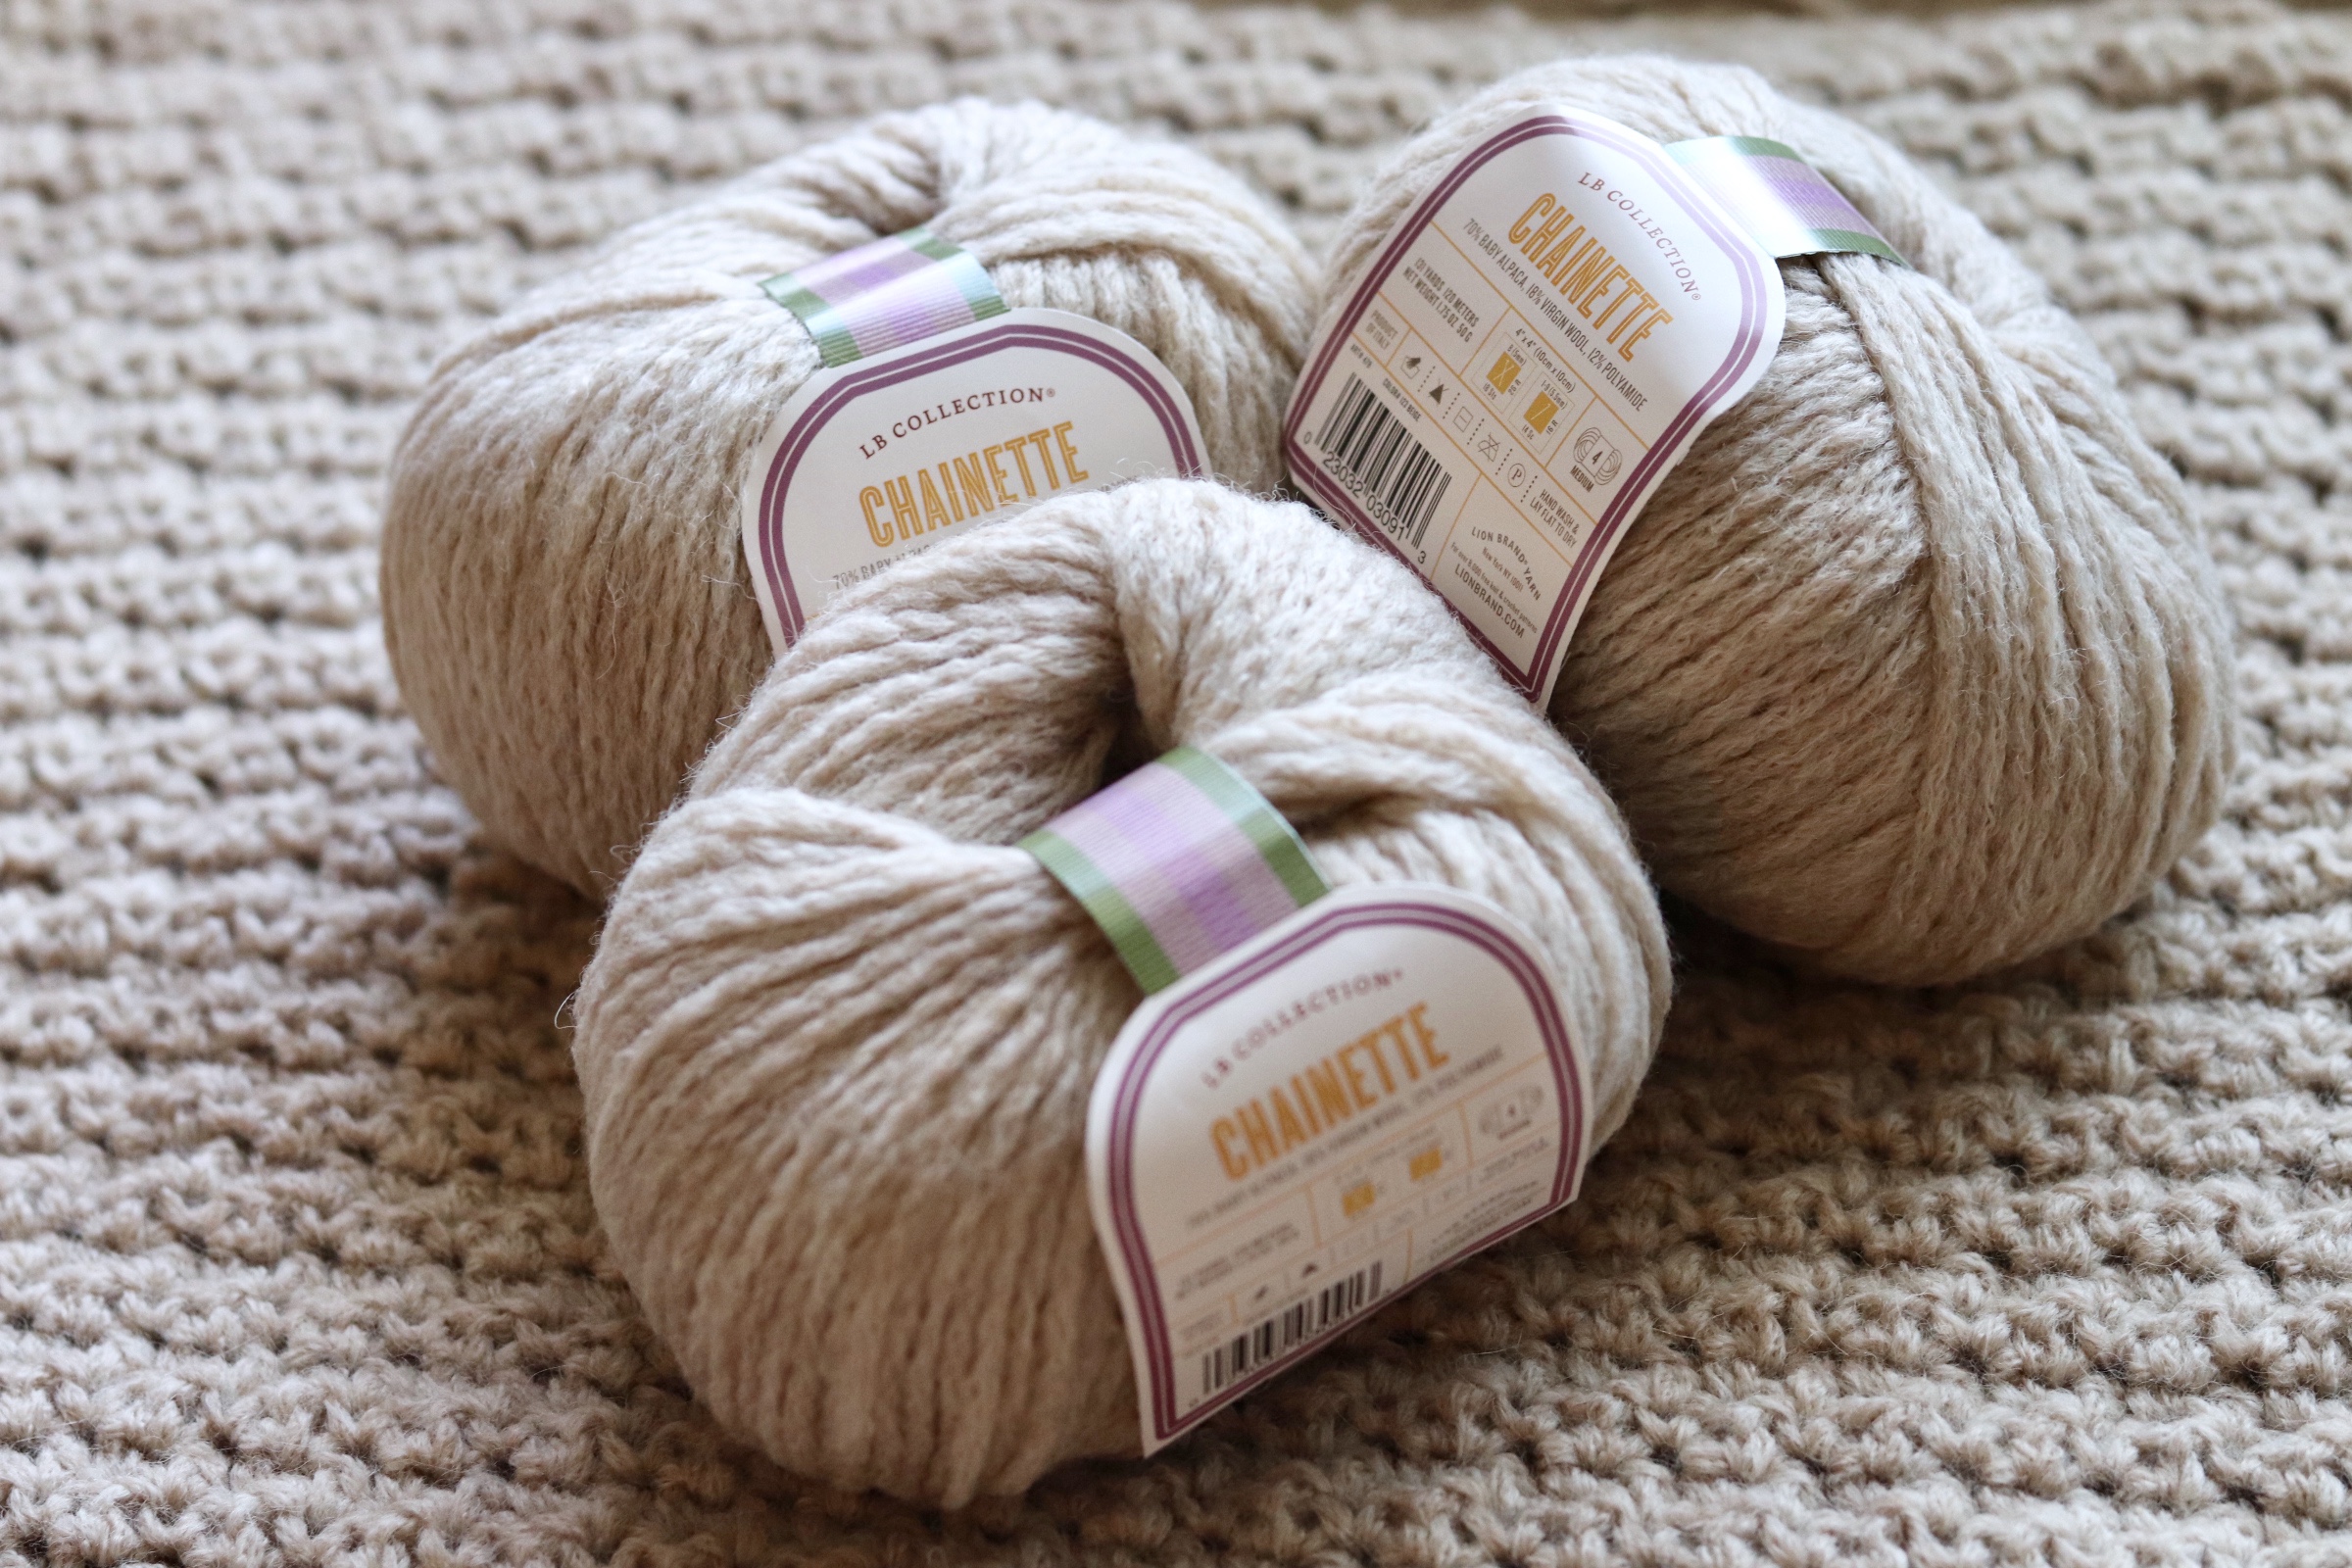 Help me identify this yarn? I know it is Lion brand. It feels